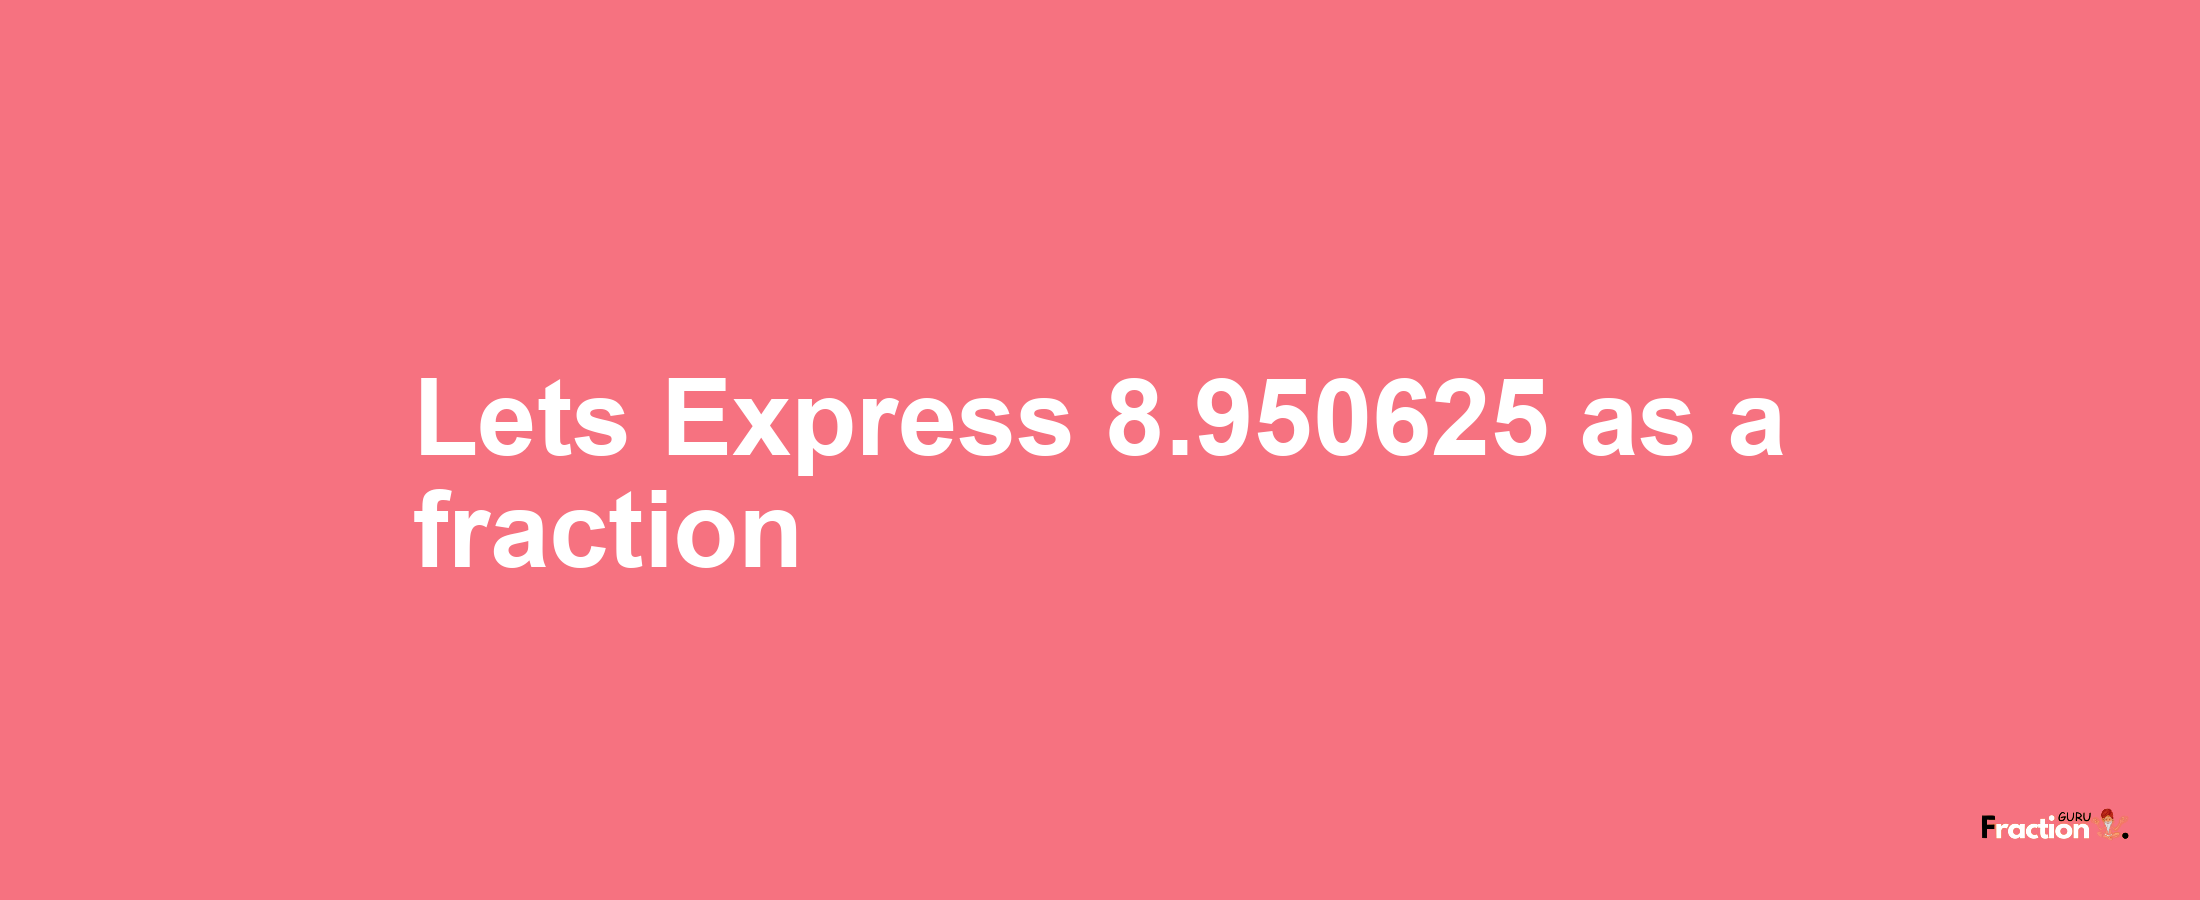 Lets Express 8.950625 as afraction